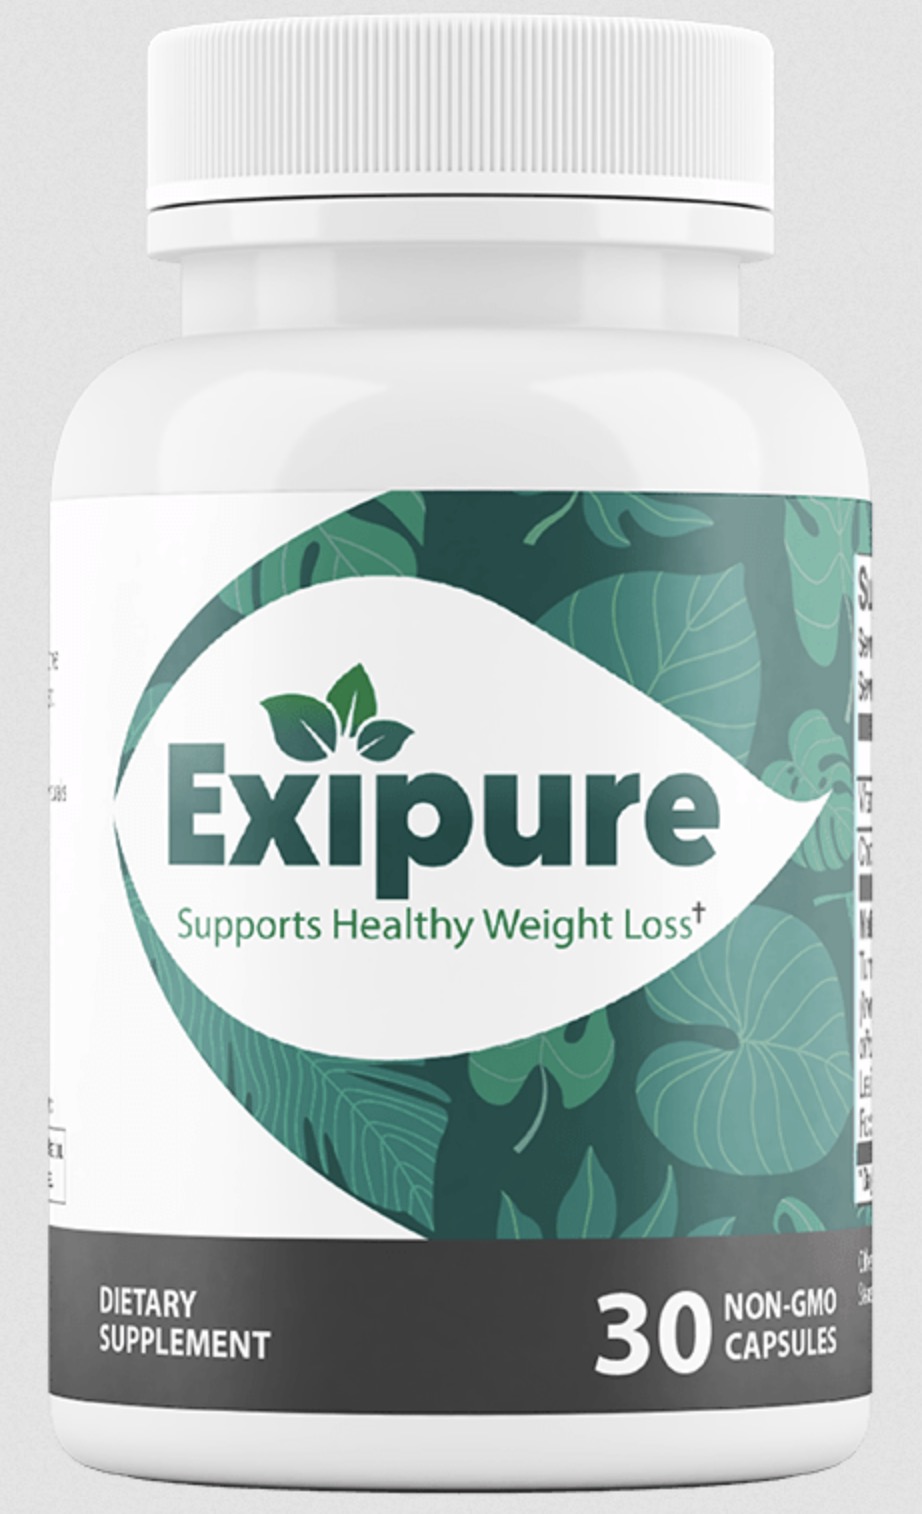 Introducing Exipure